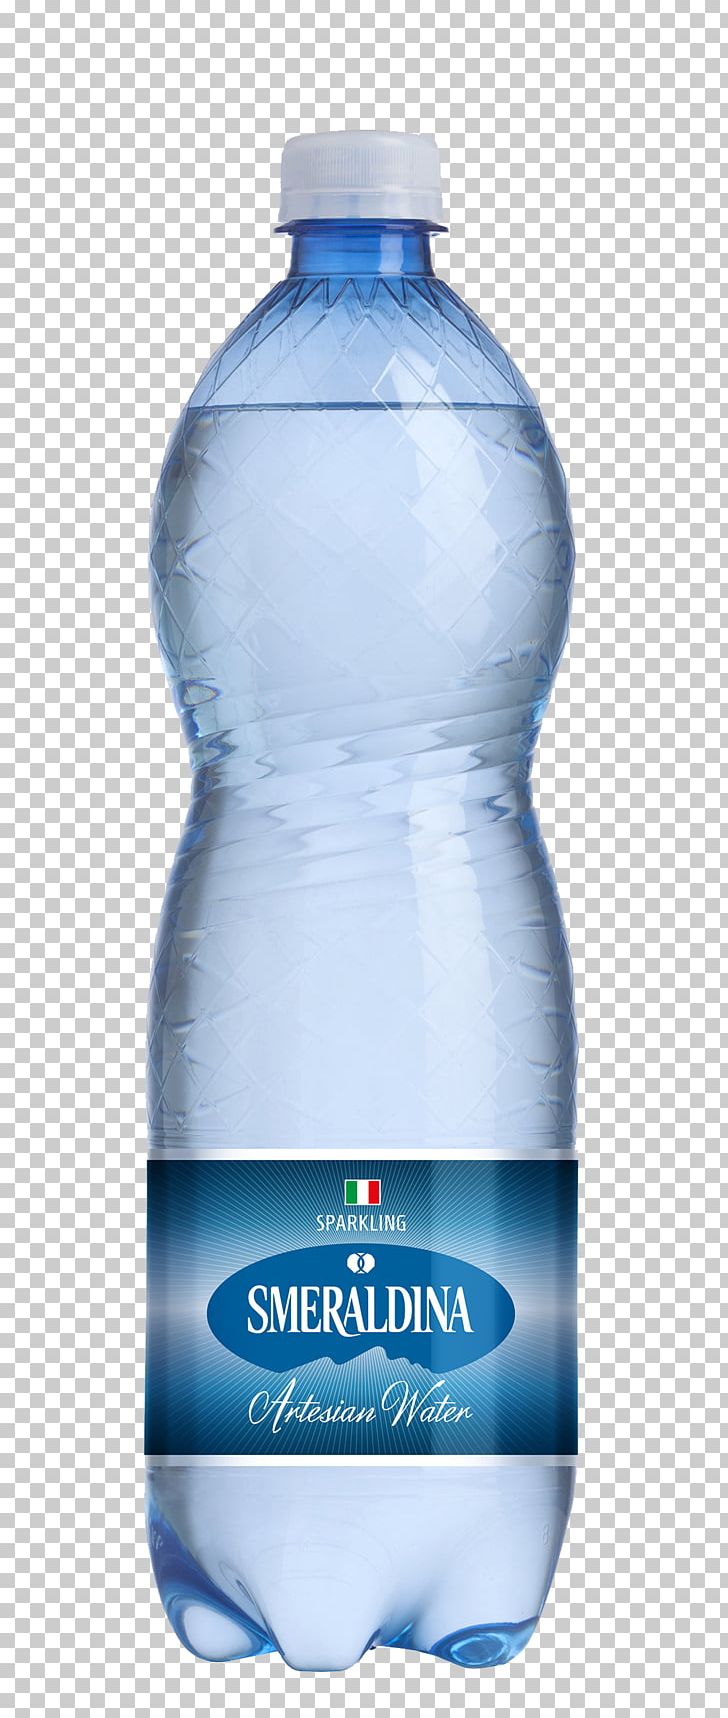 Mineral Water Water Bottles Bottled Water Liquid PNG, Clipart, Bottle, Bottled Water, Distilled Water, Drinking Water, Liquid Free PNG Download